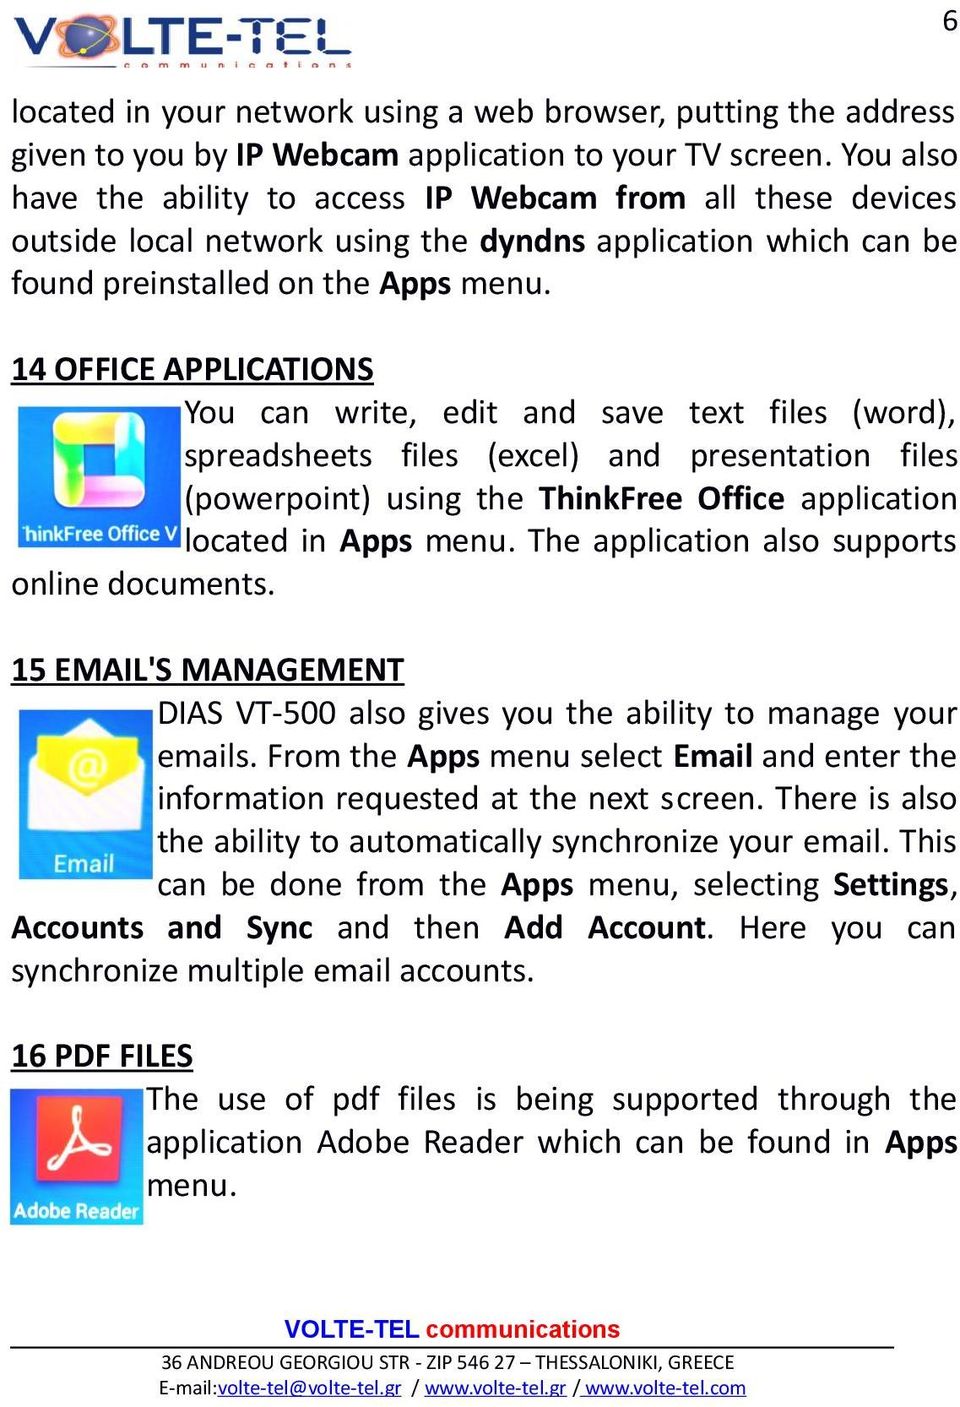 14 OFFICE APPLICATIONS You can write, edit and save text files (word), spreadsheets files (excel) and presentation files (powerpoint) using the ThinkFree Office application located in Apps menu.